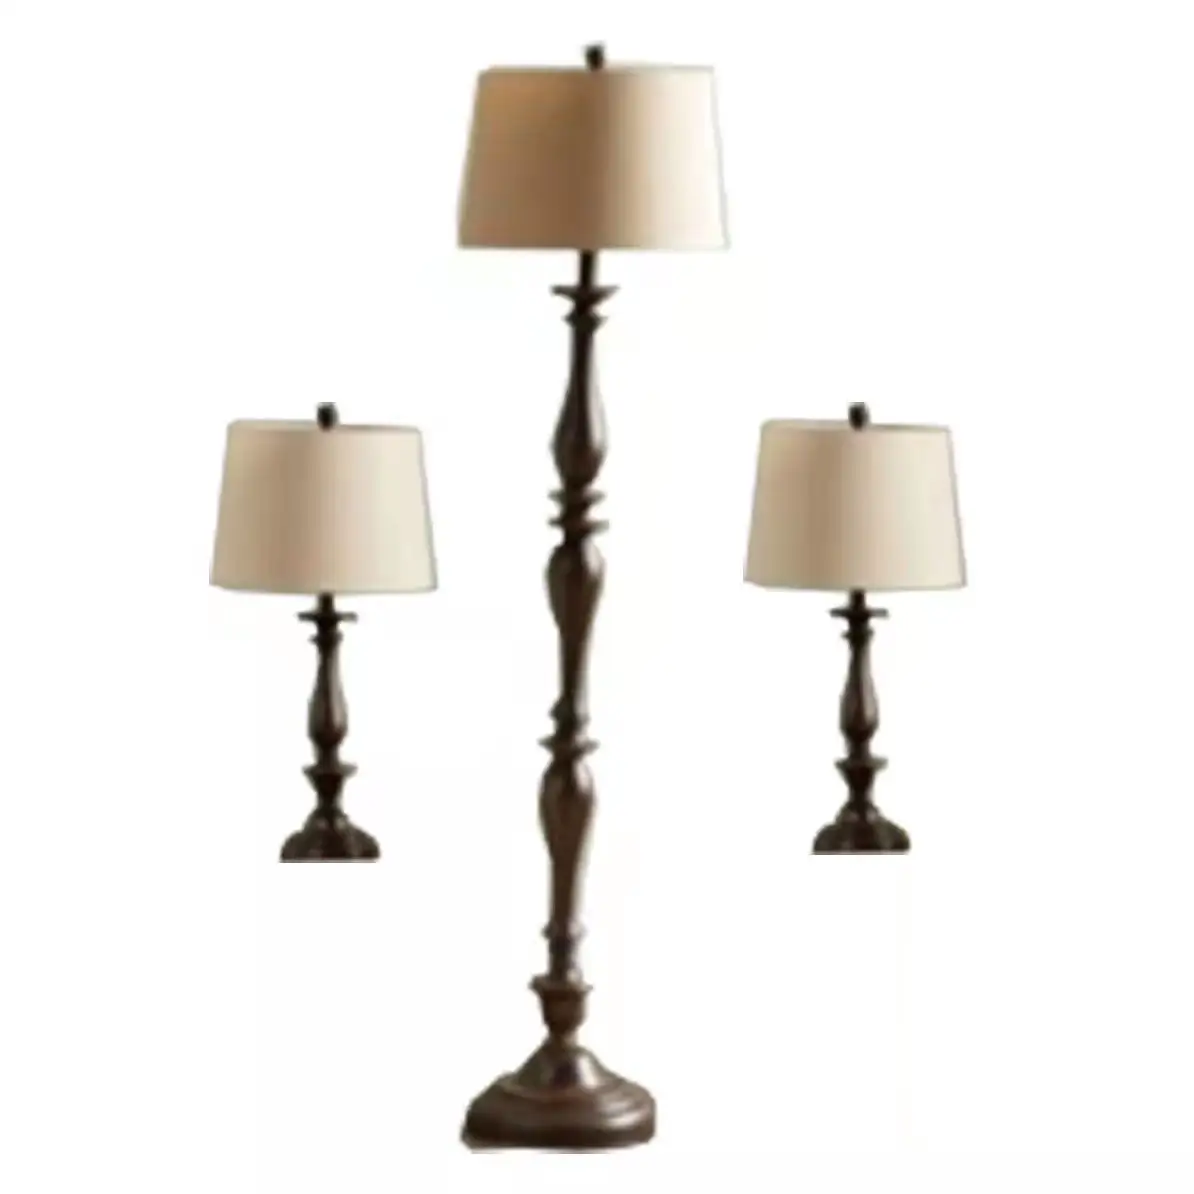 Cheap price Vintage Resin Floor Lamp Set Of 3 With Beige Fabric Shade